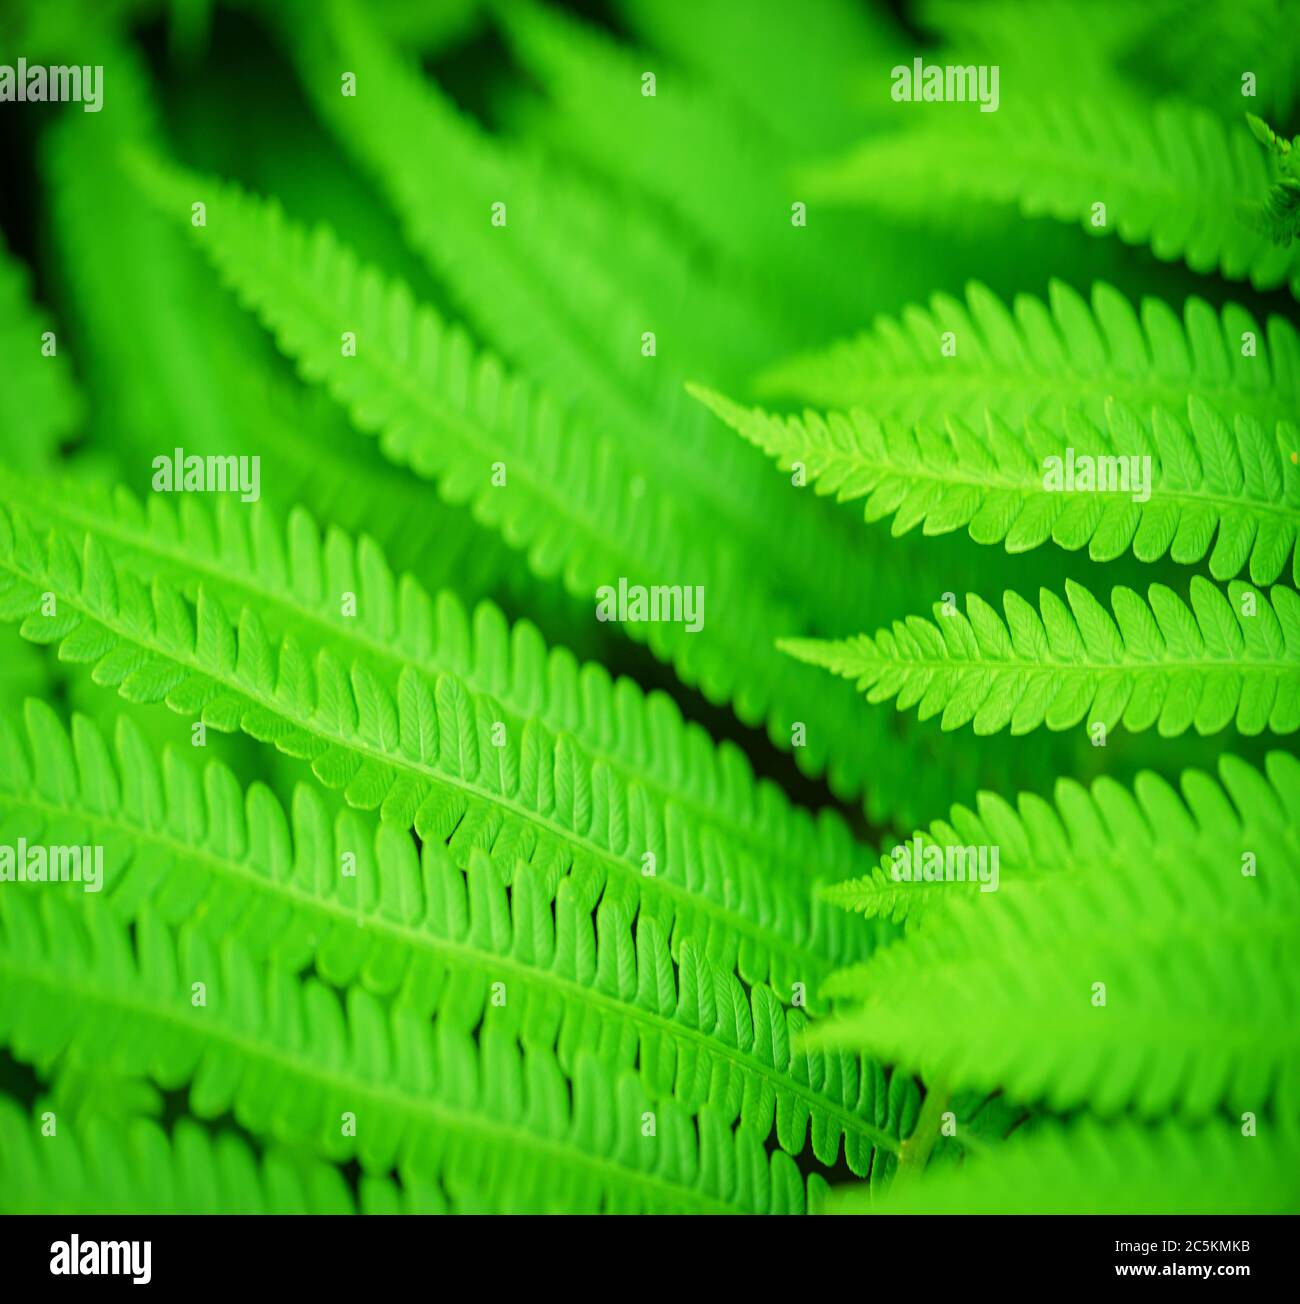 Selective focus on the image. Green leaf of fern black background. Wildlife Paportik. Green leaf. Symbol Wildlife Ecology. Out of focus. Stock Photo